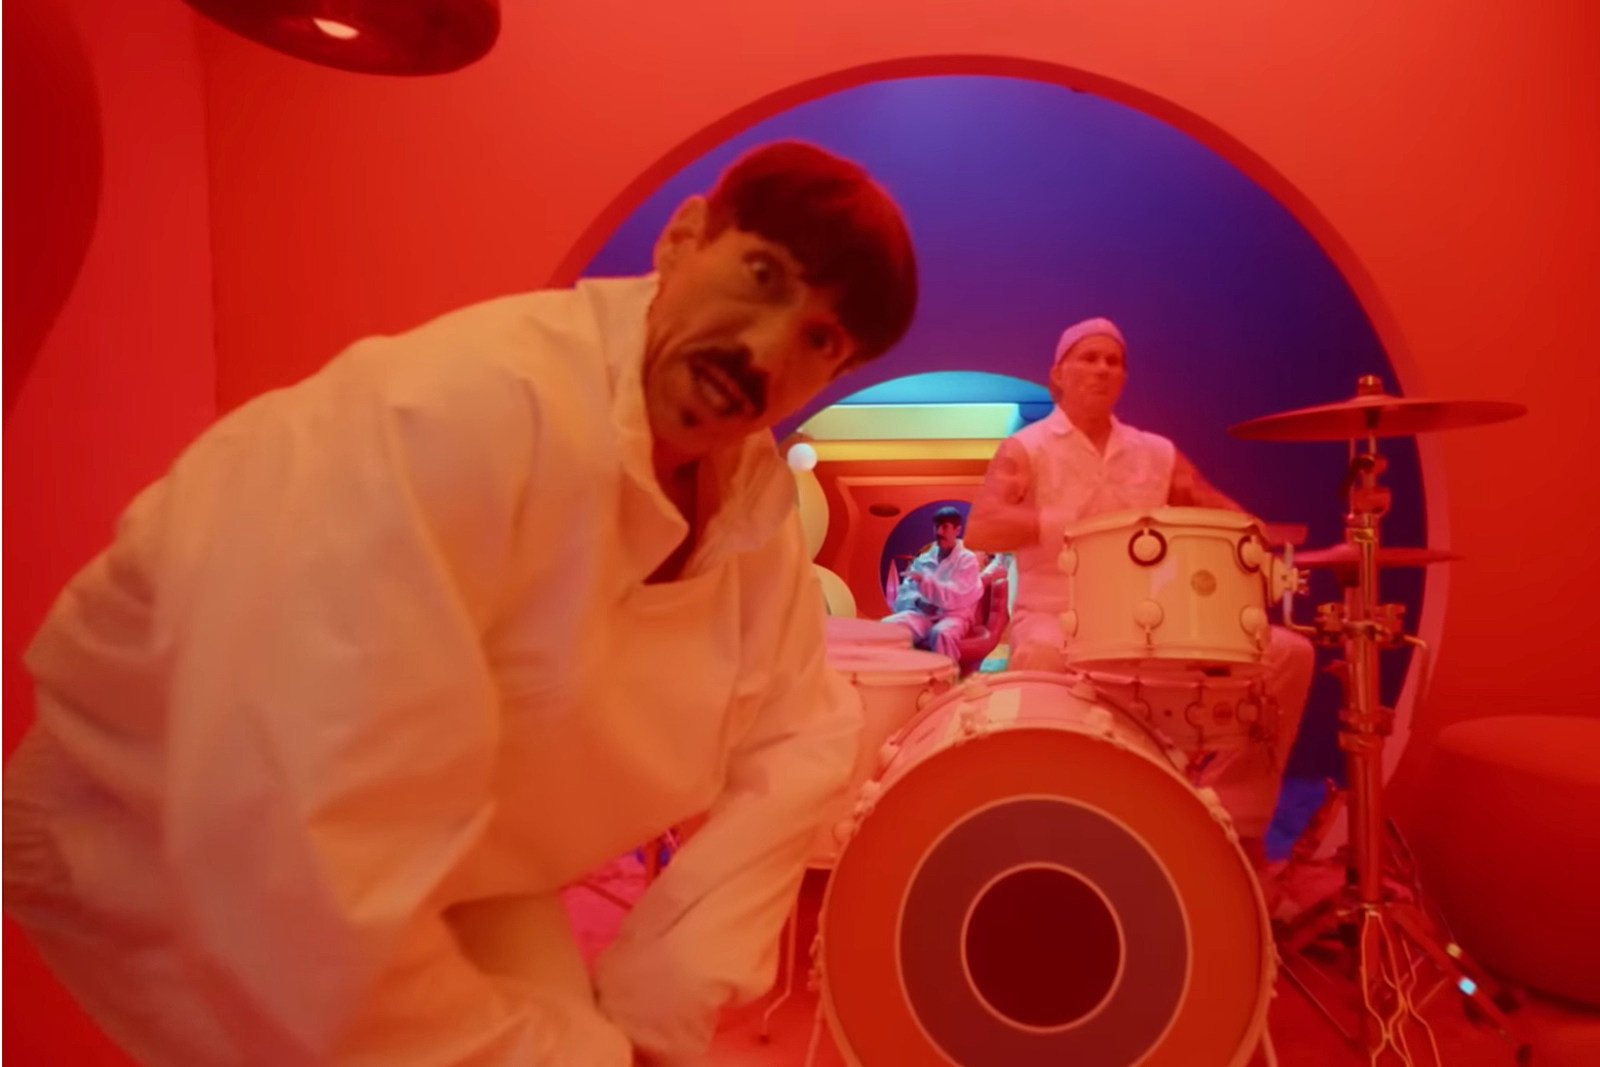 “Tippa My Tongue”, lo nuevo de Red Hot Chili Peppers